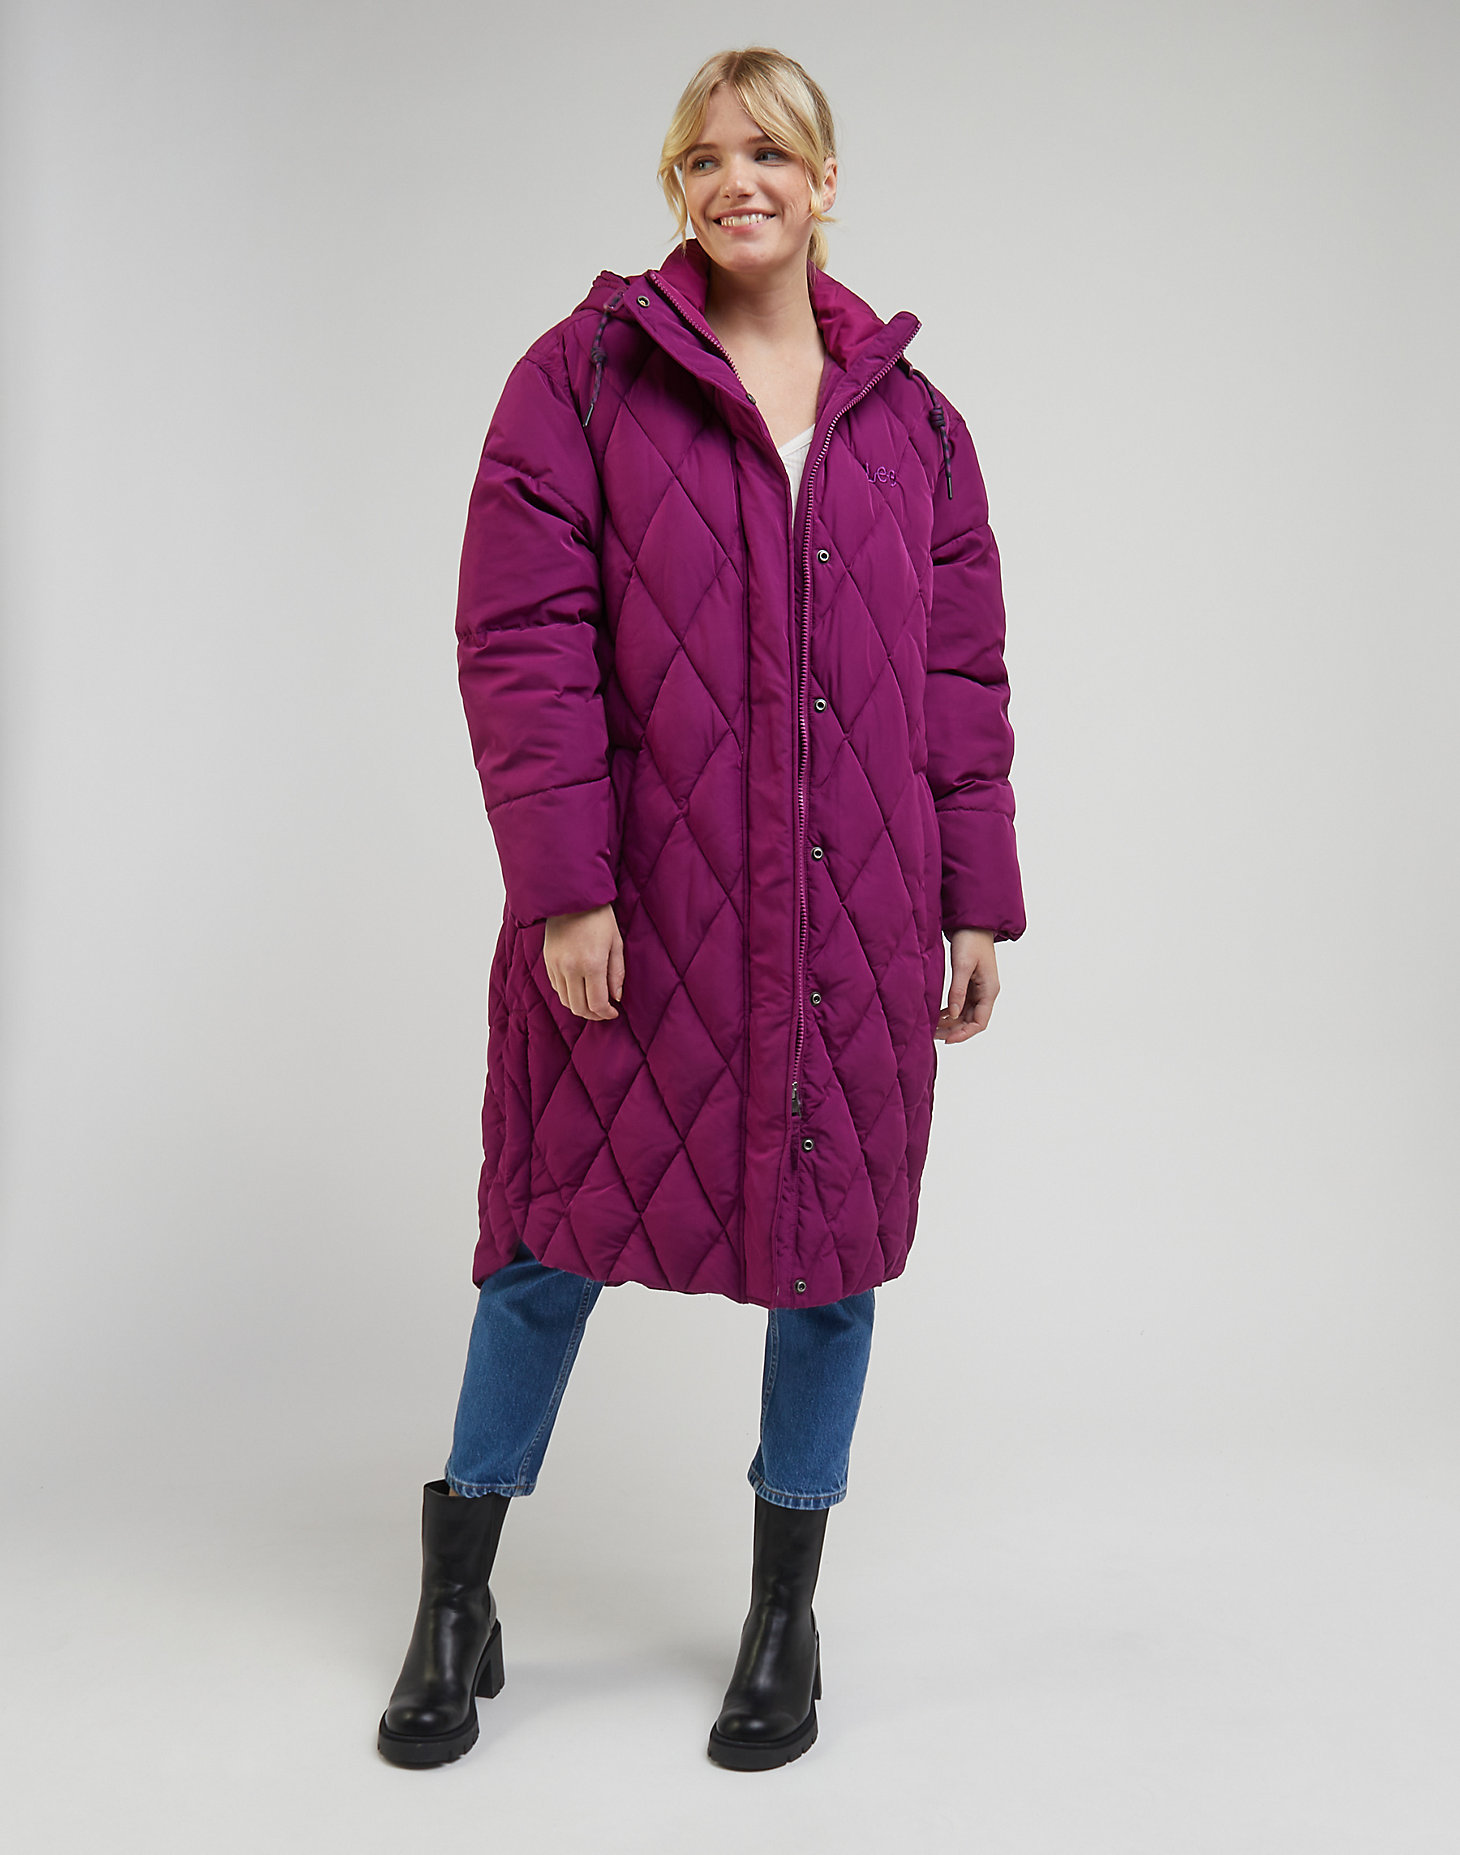 Long Puffer in Foxy Violet alternative view 2